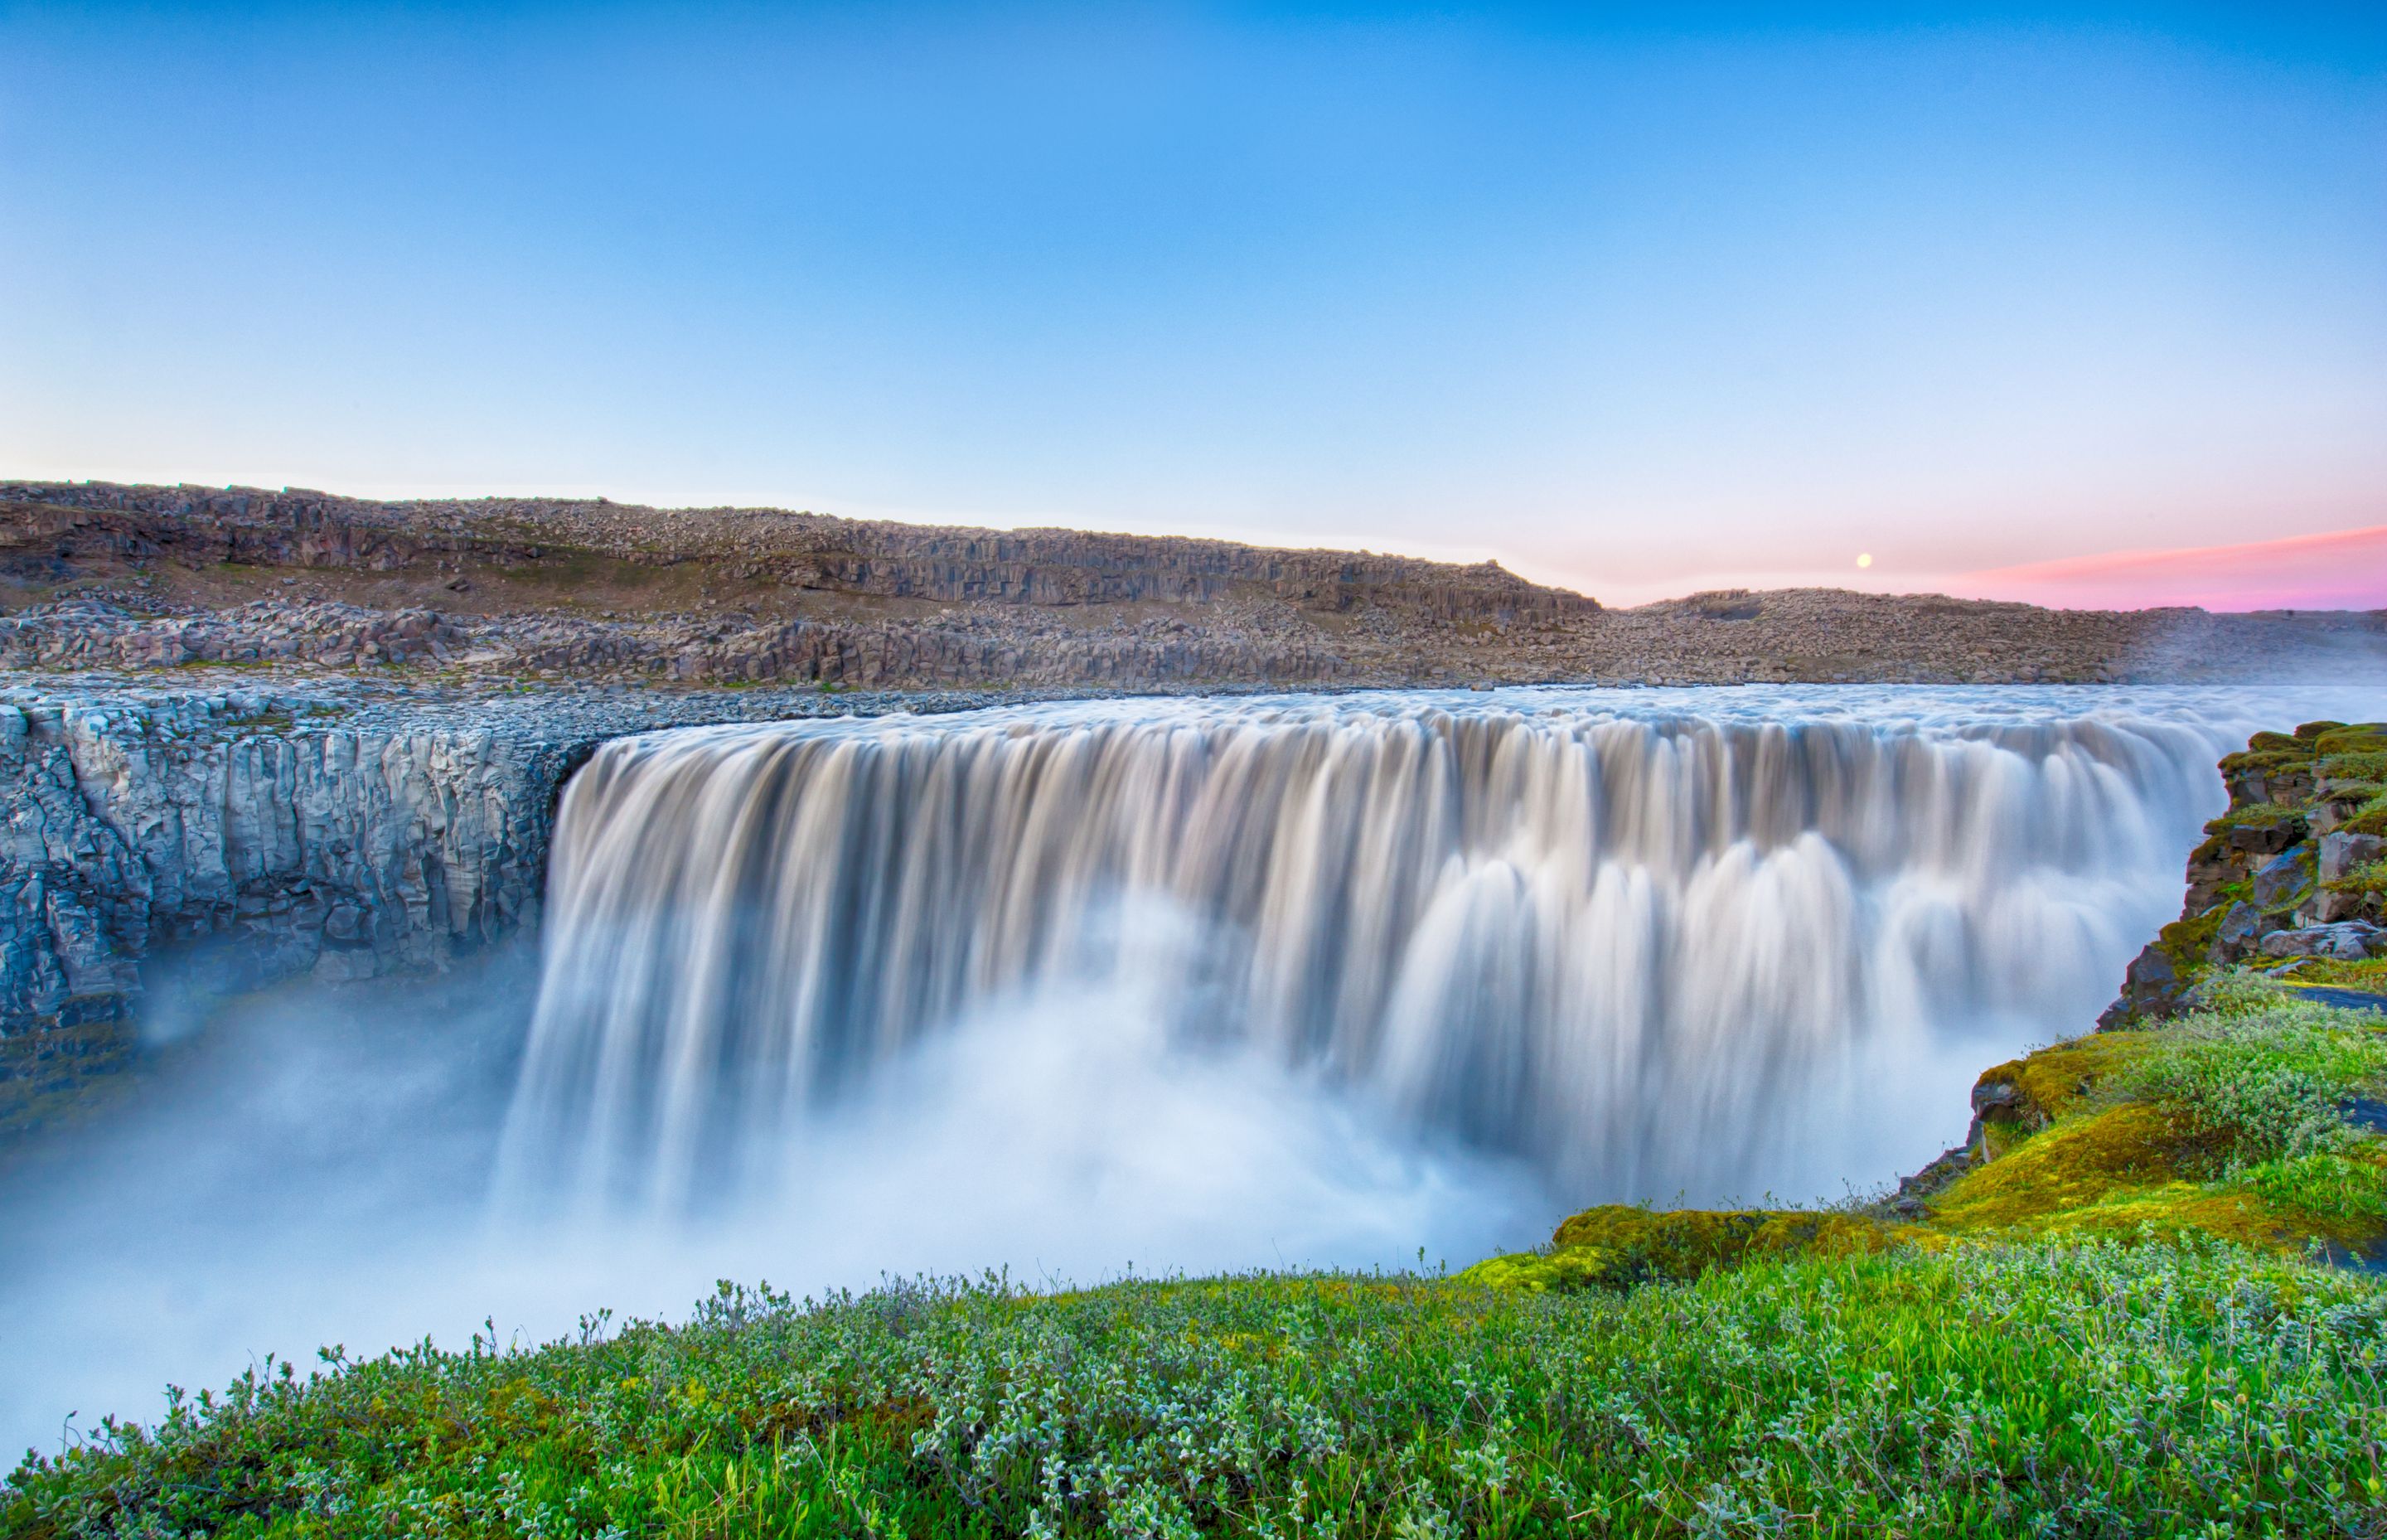 The mighty Dettifoss waterfall, Europe's most powerful waterfall, mesmerizing visitors with its sheer power and beauty